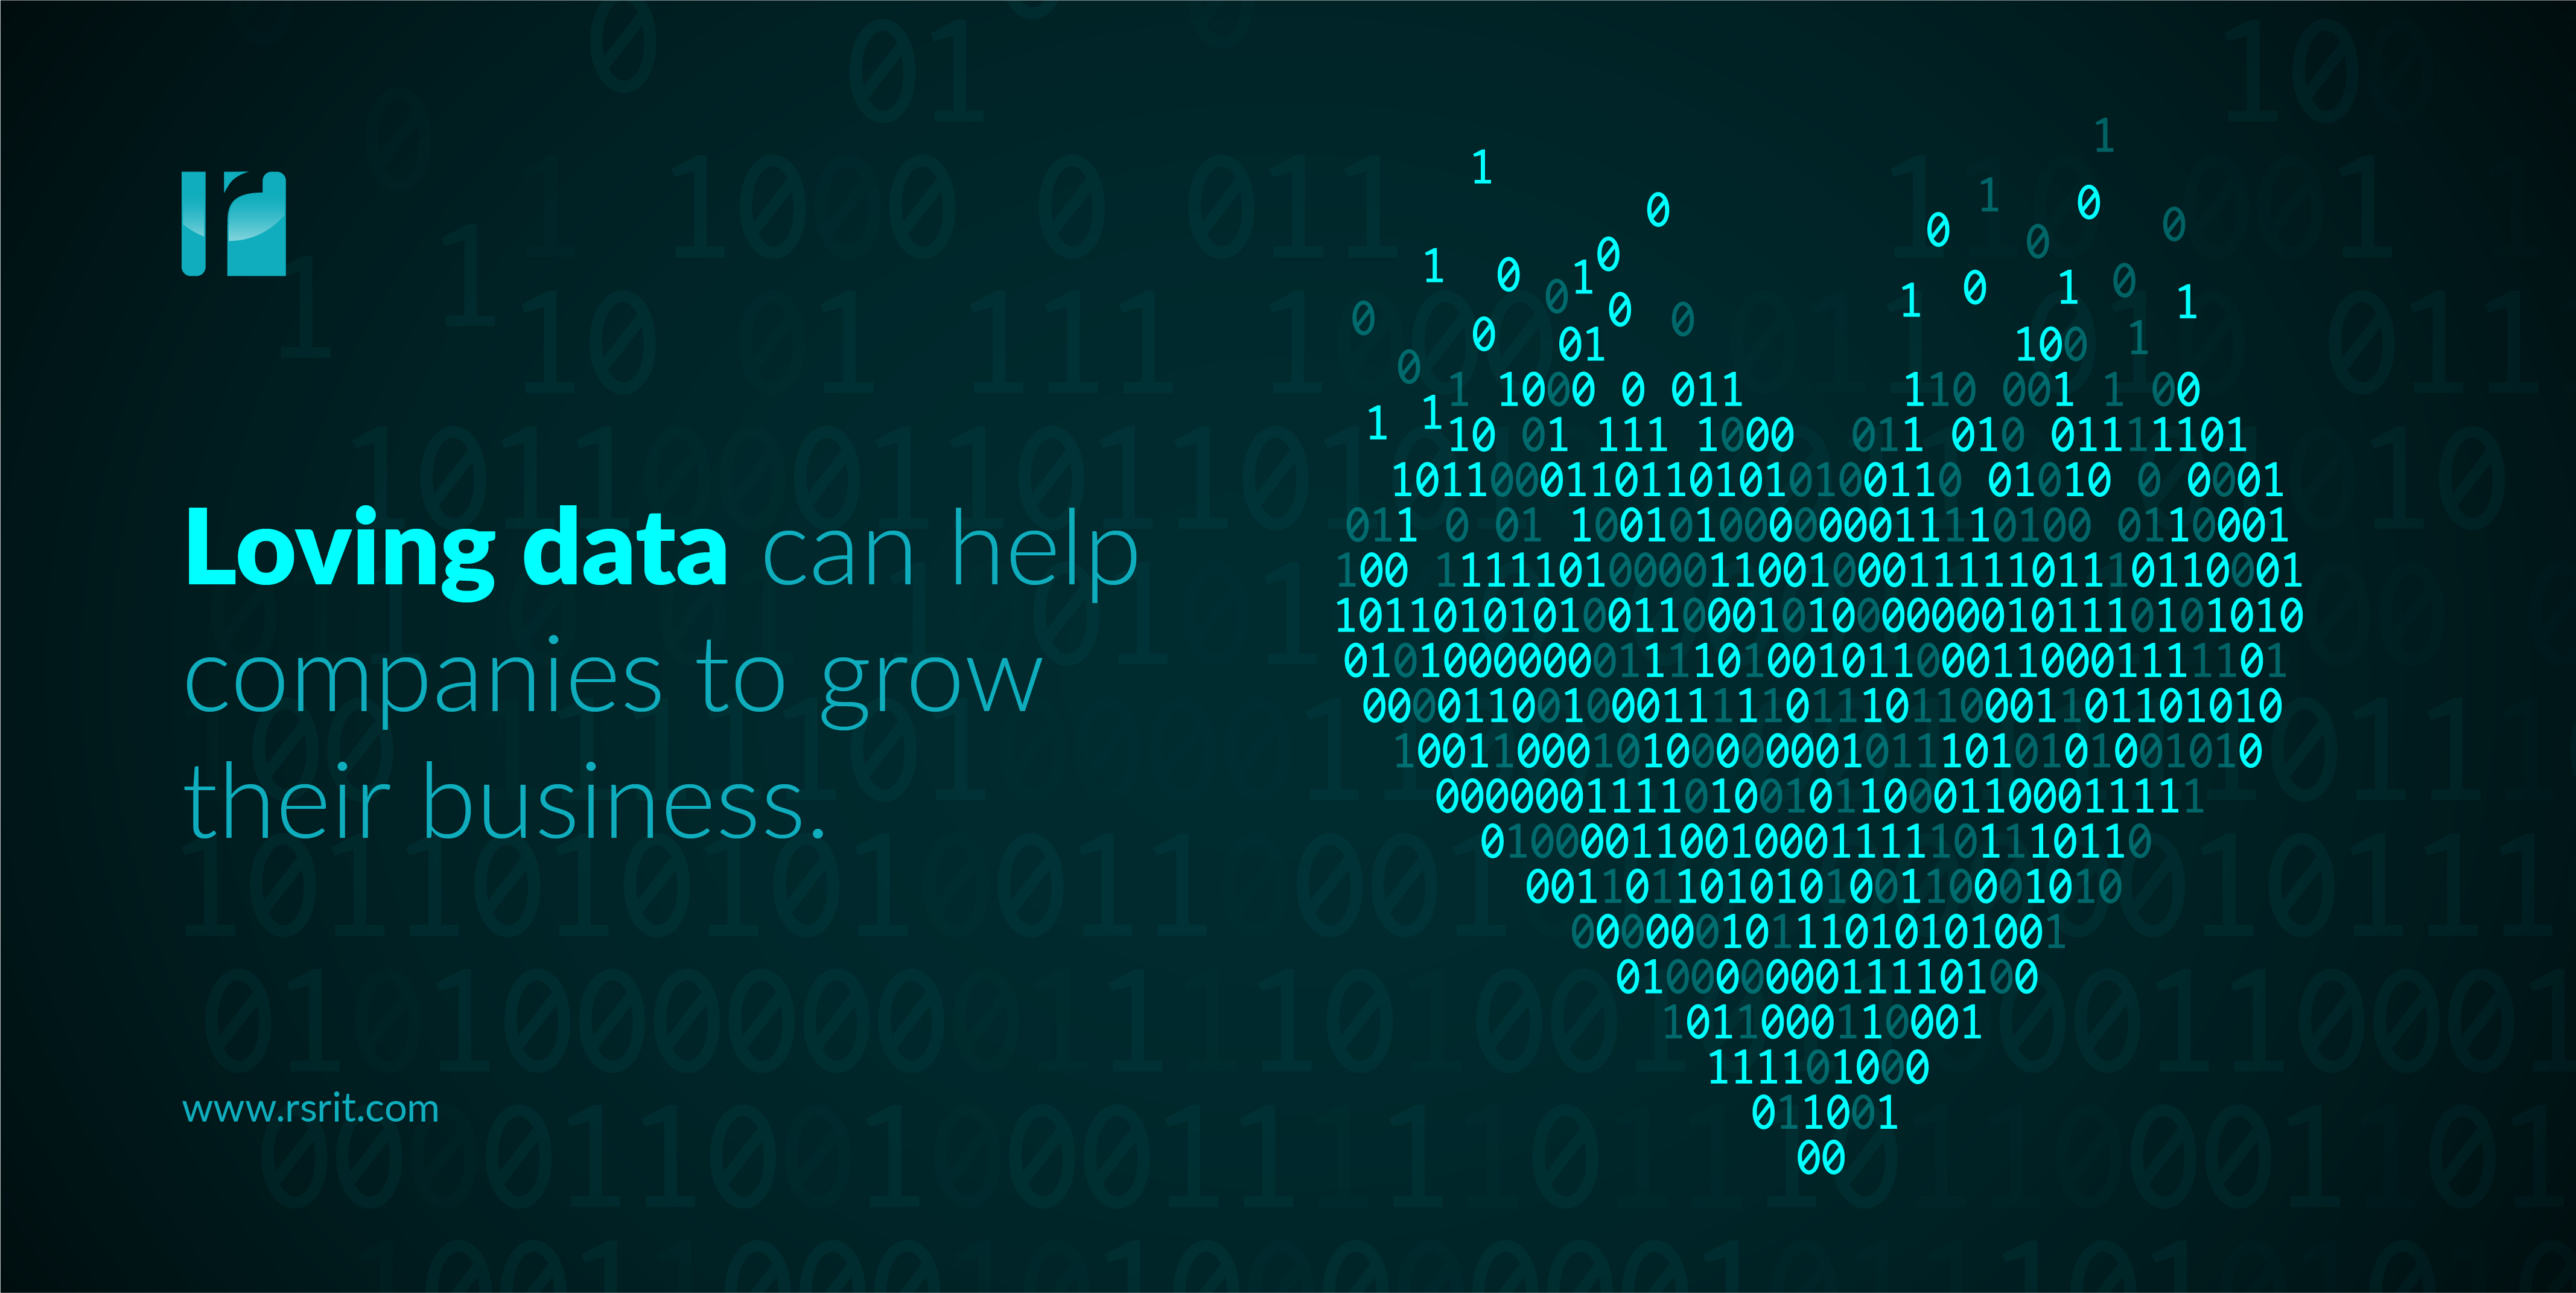 Loving data can help companies to grow their business.